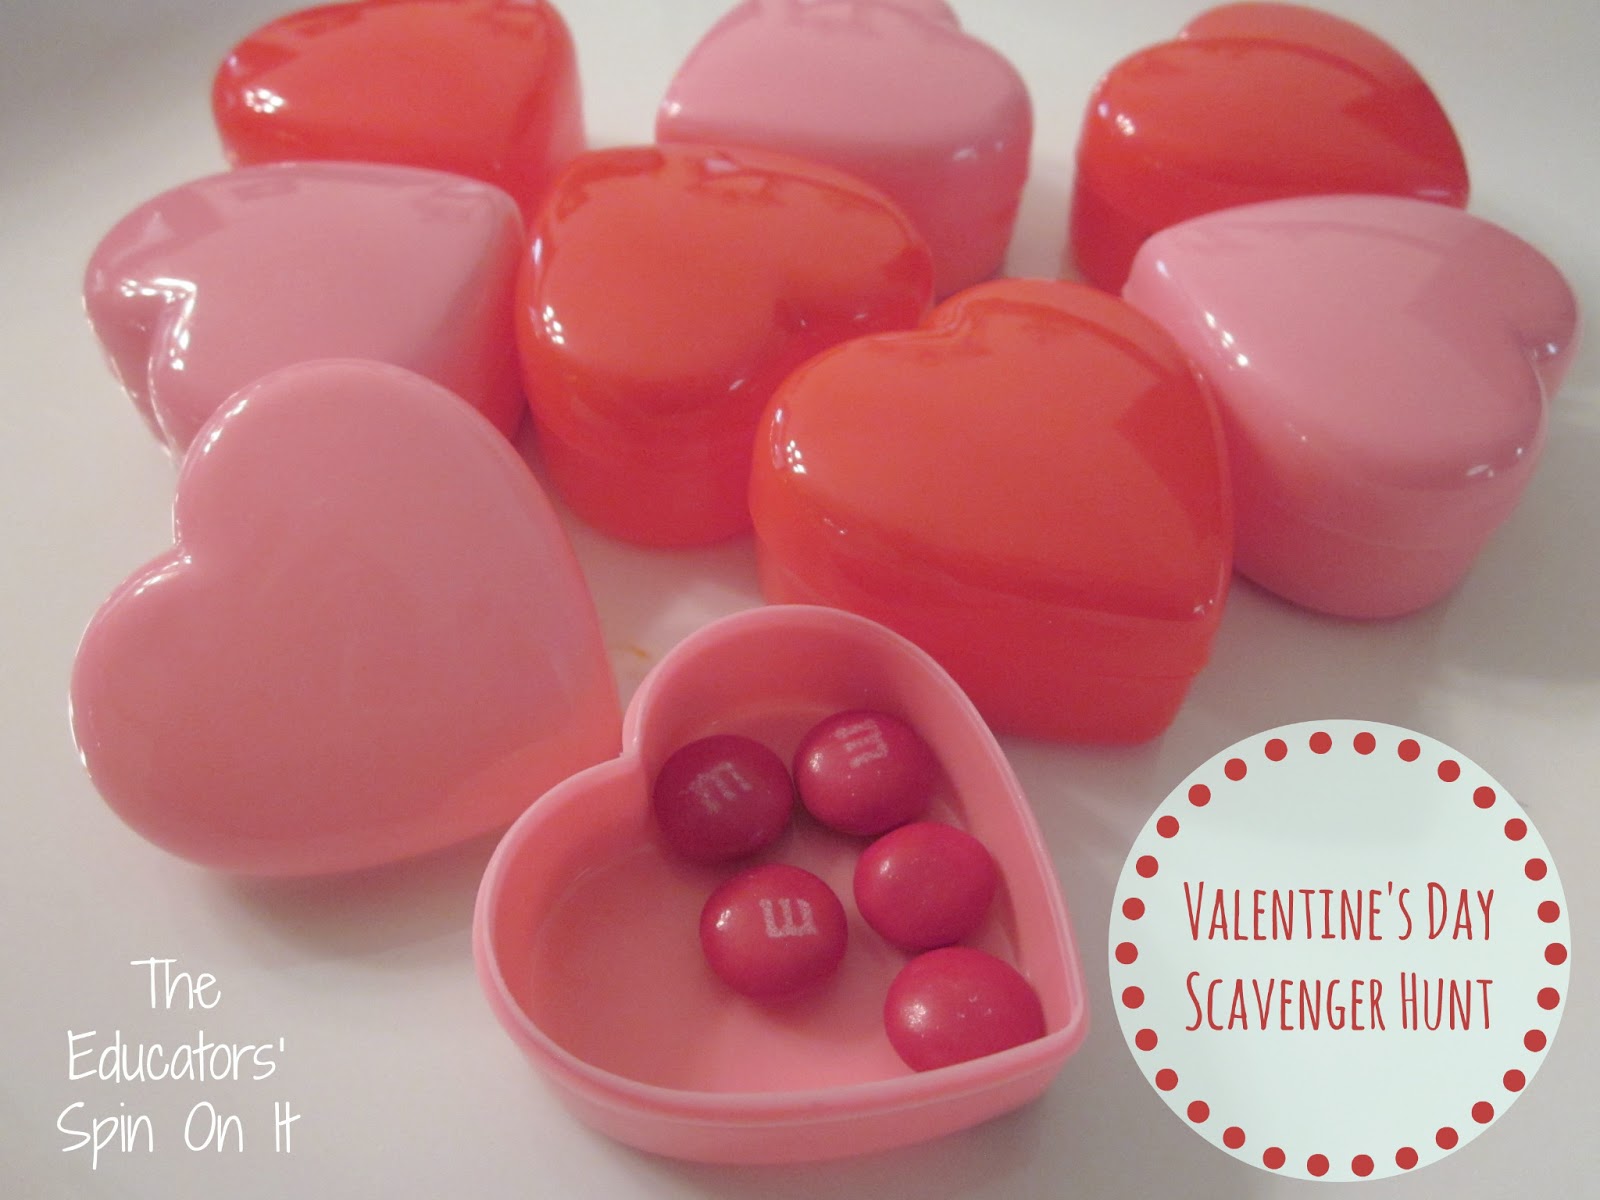 ... ' Spin On It: Valentine's Day Scavenger Hunt with Free Printables